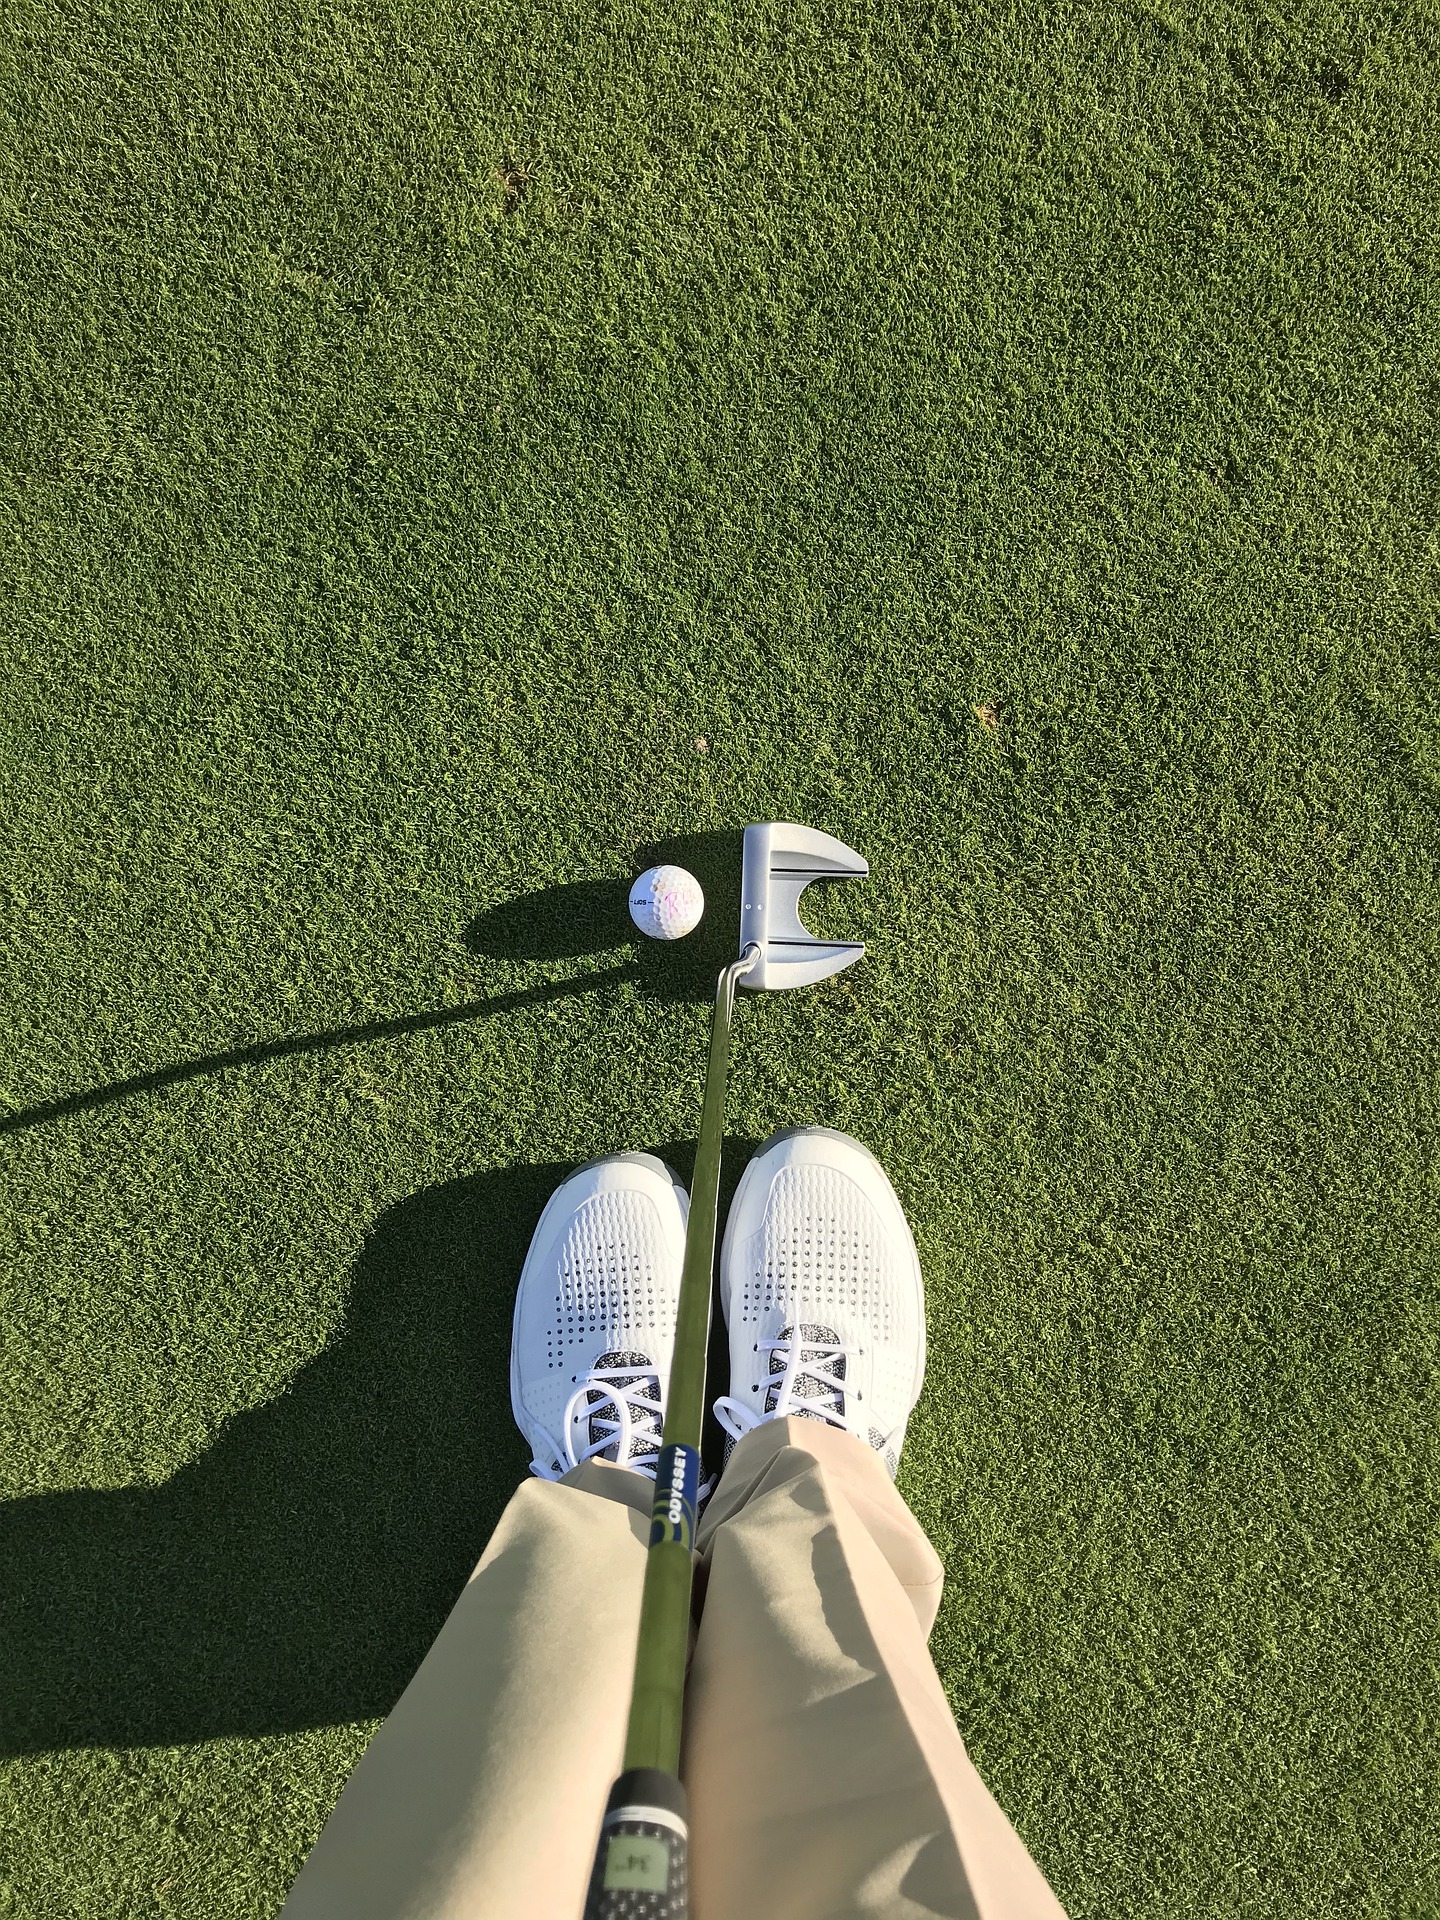 Do Golf Shoes Help Your Golf Game?